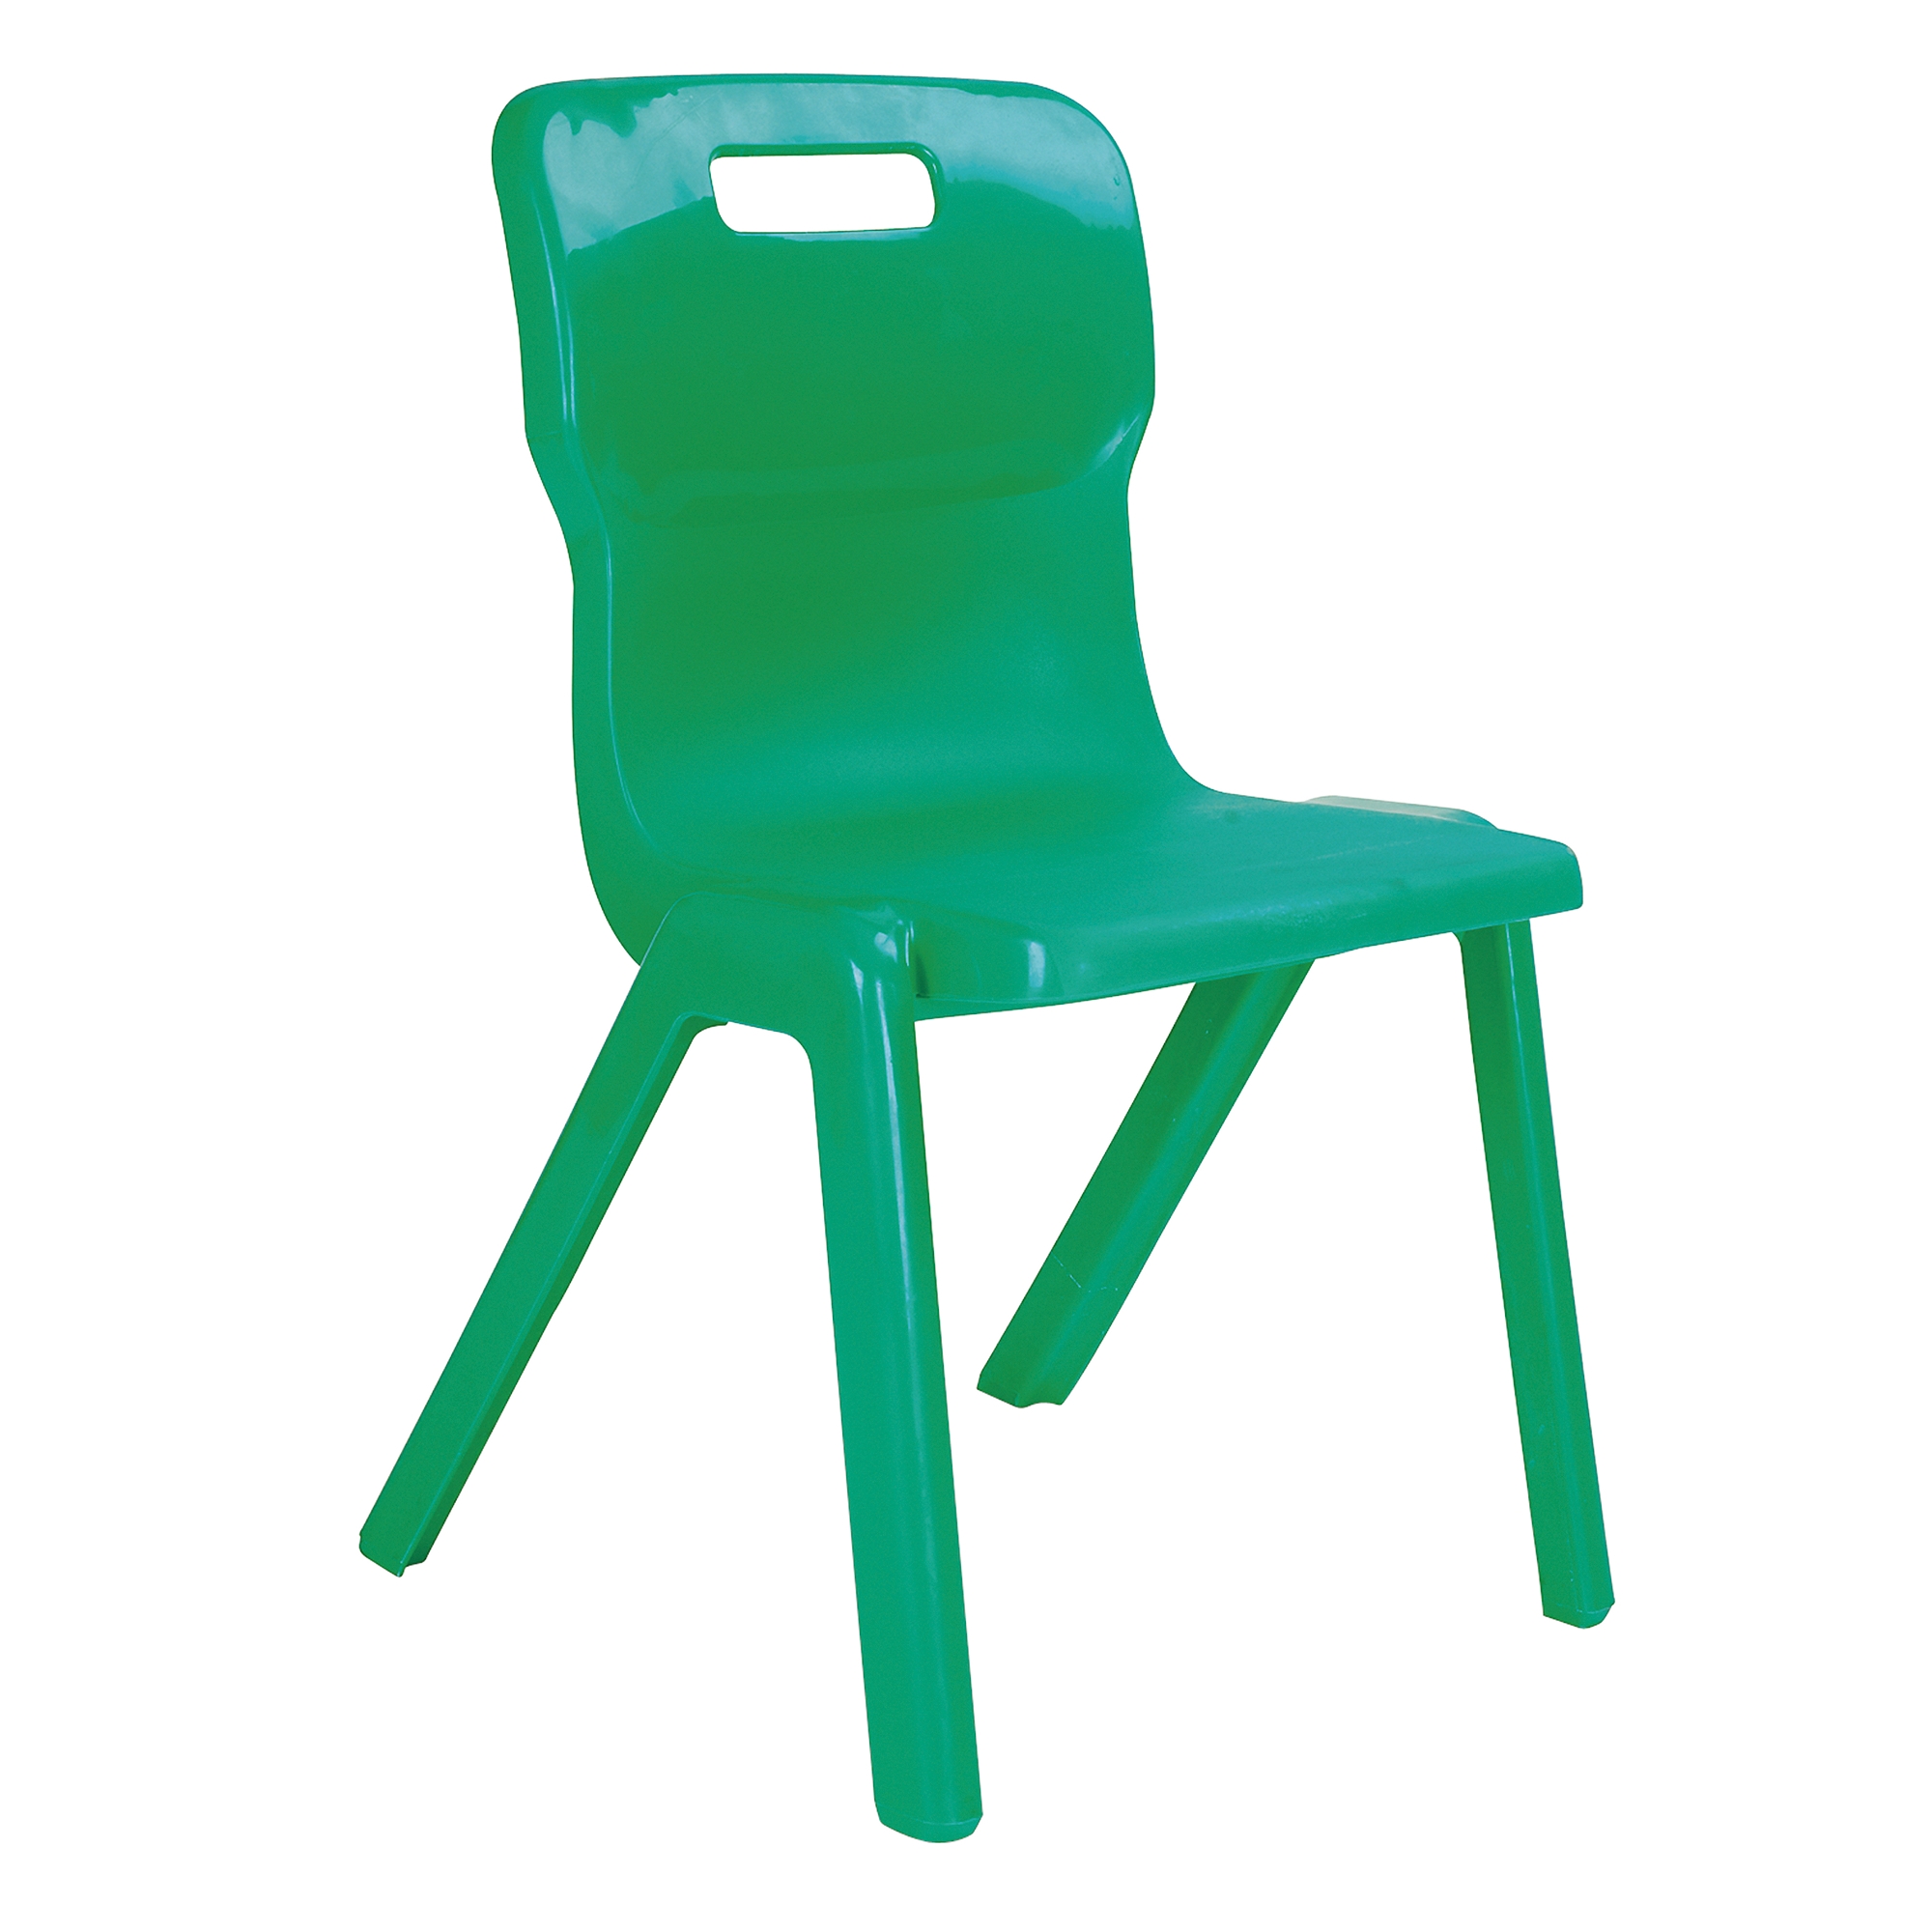 One Piece Titan Chair - Size 6 Age 14+ Green